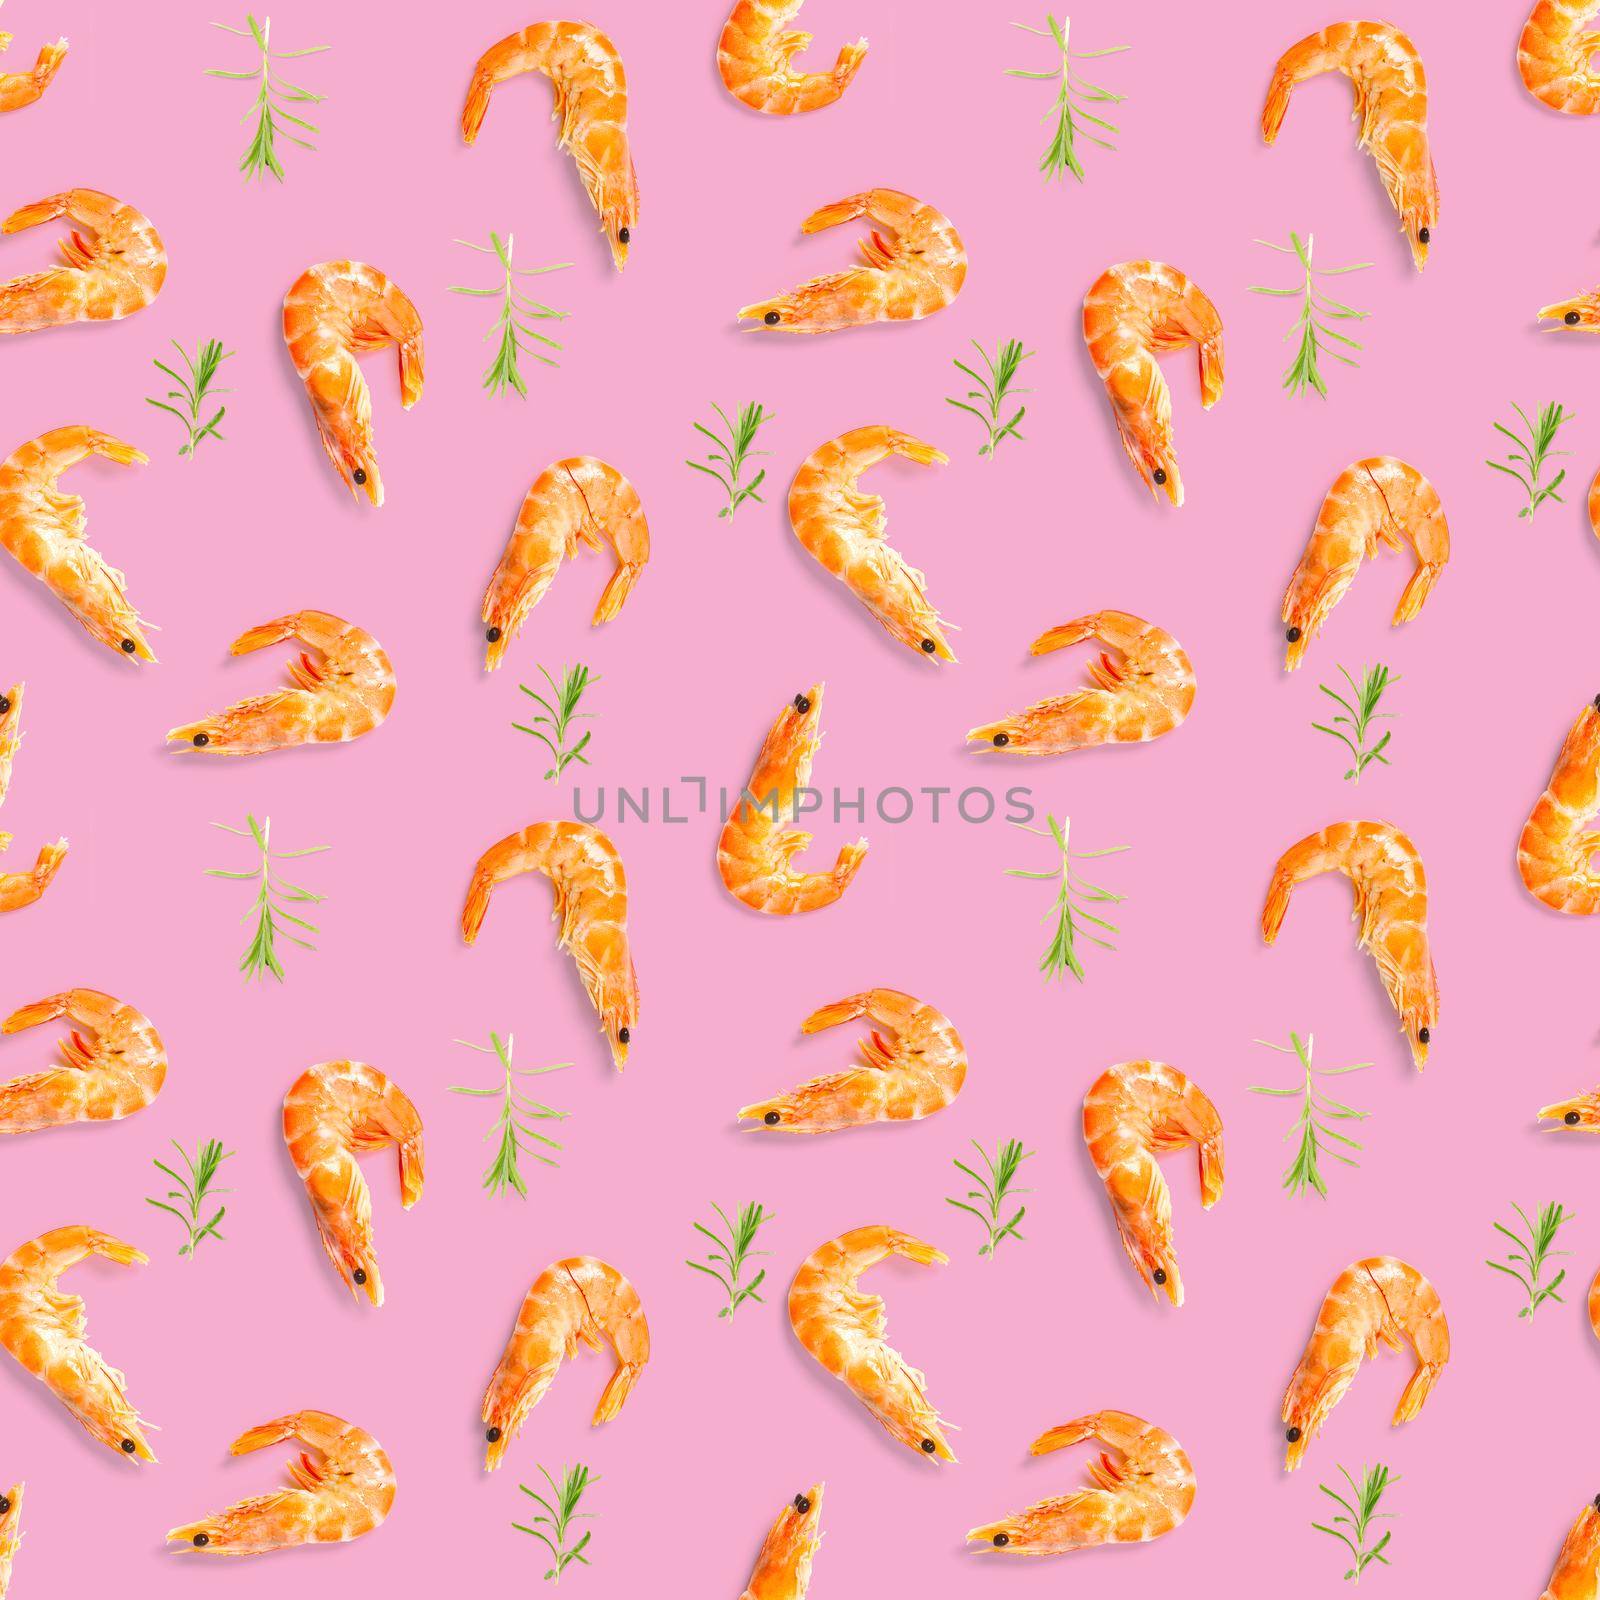 Tiger shrimp. Seamless pattern made from Prawn isolated on a pink background. Seafood seamless pattern with shrimps. seafood pattern by PhotoTime